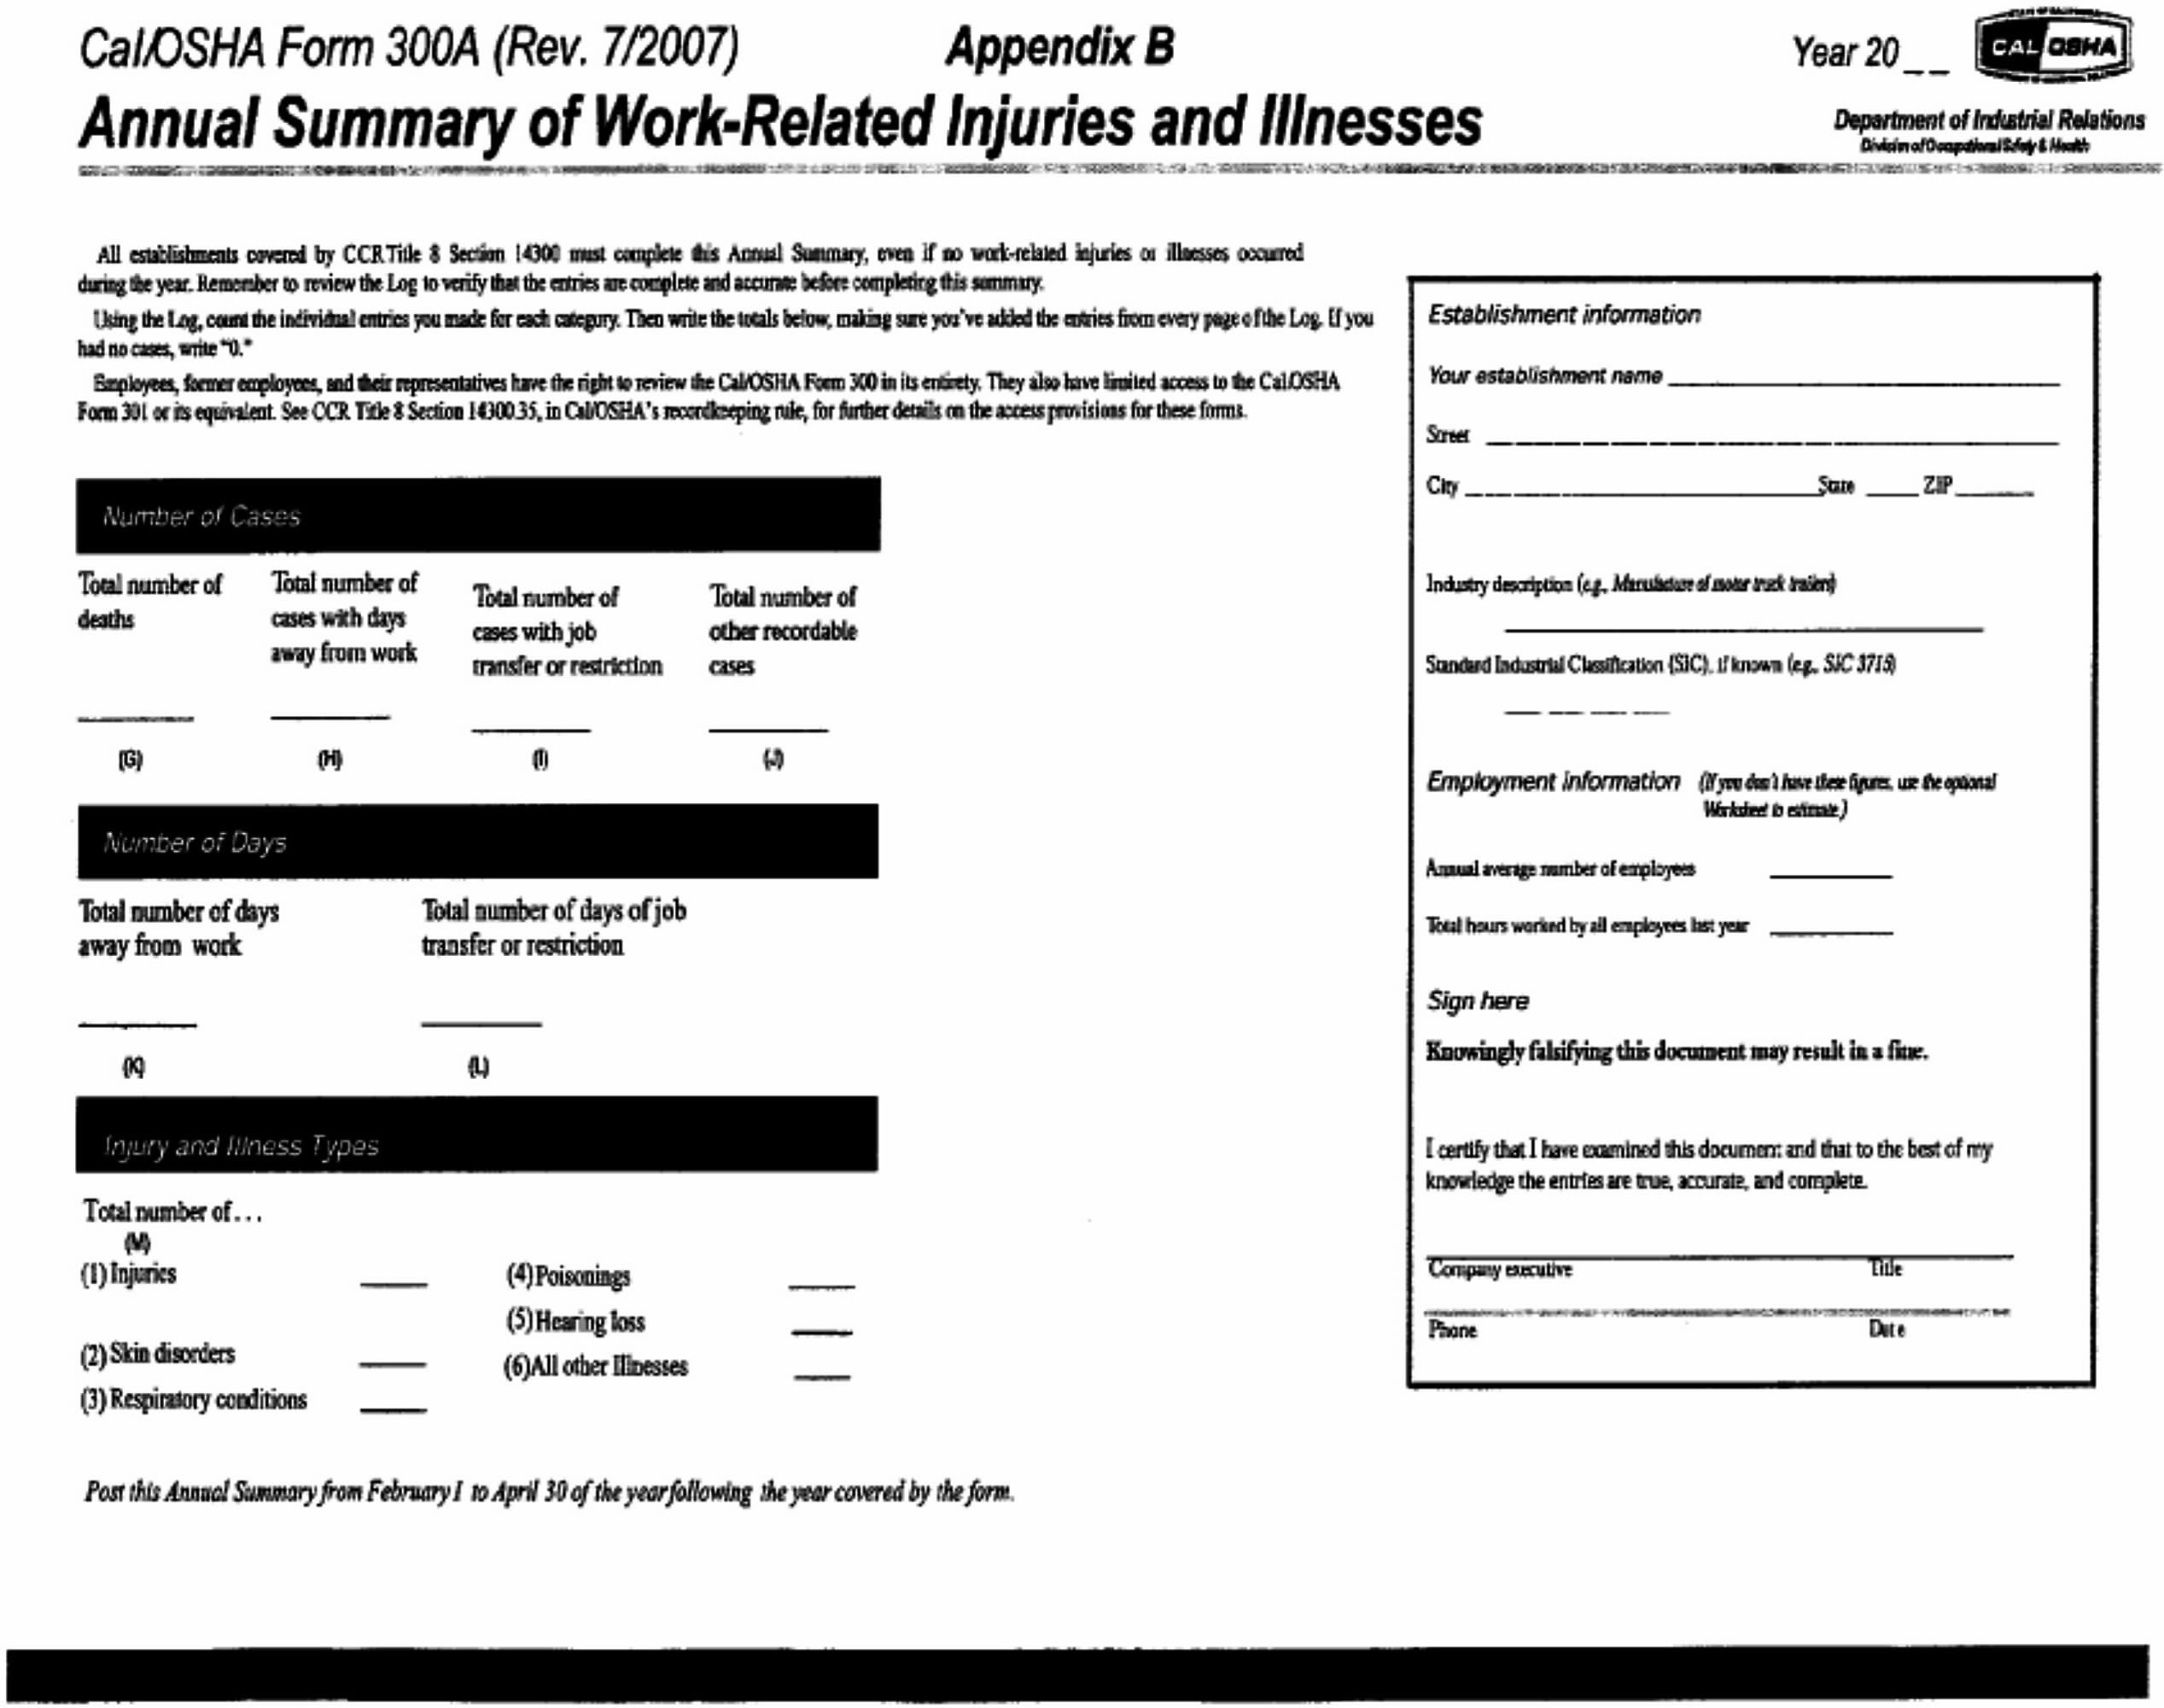 Image 1 within Appendix B Cal/OSHA Form 300A (Rev. 7/2007) Annual Summary of Work-Related Injuries and Illnesses